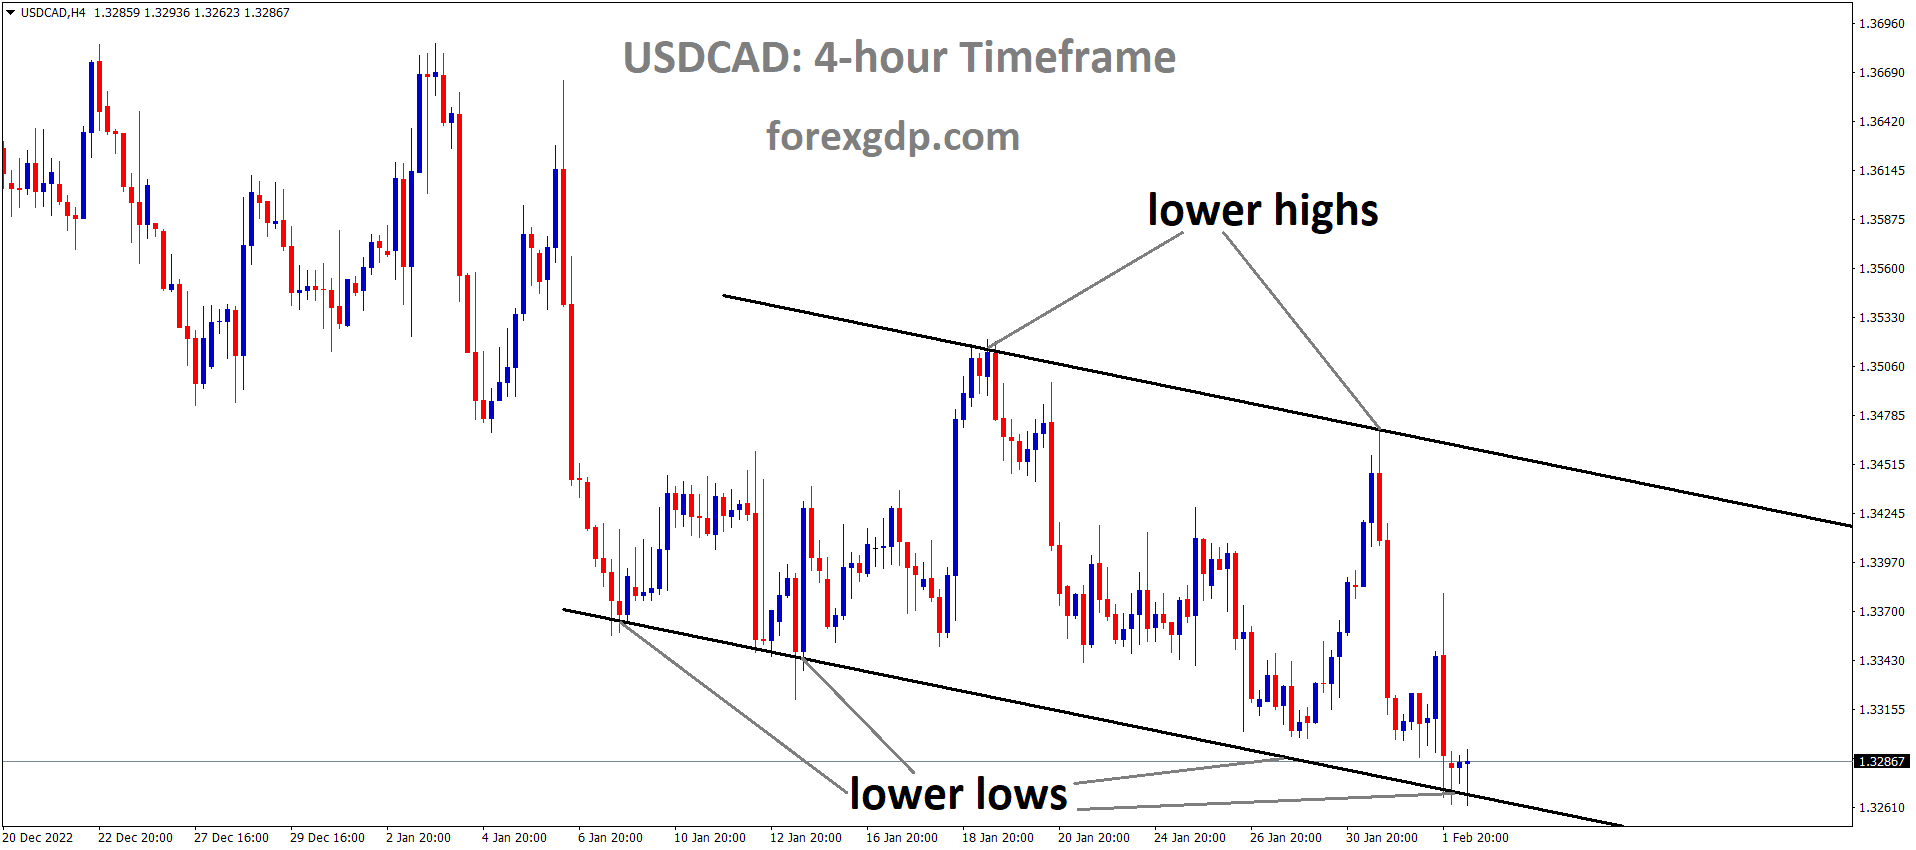 USDCAD is moving in the Descending channel and the market has reached the lower low area of the channel.